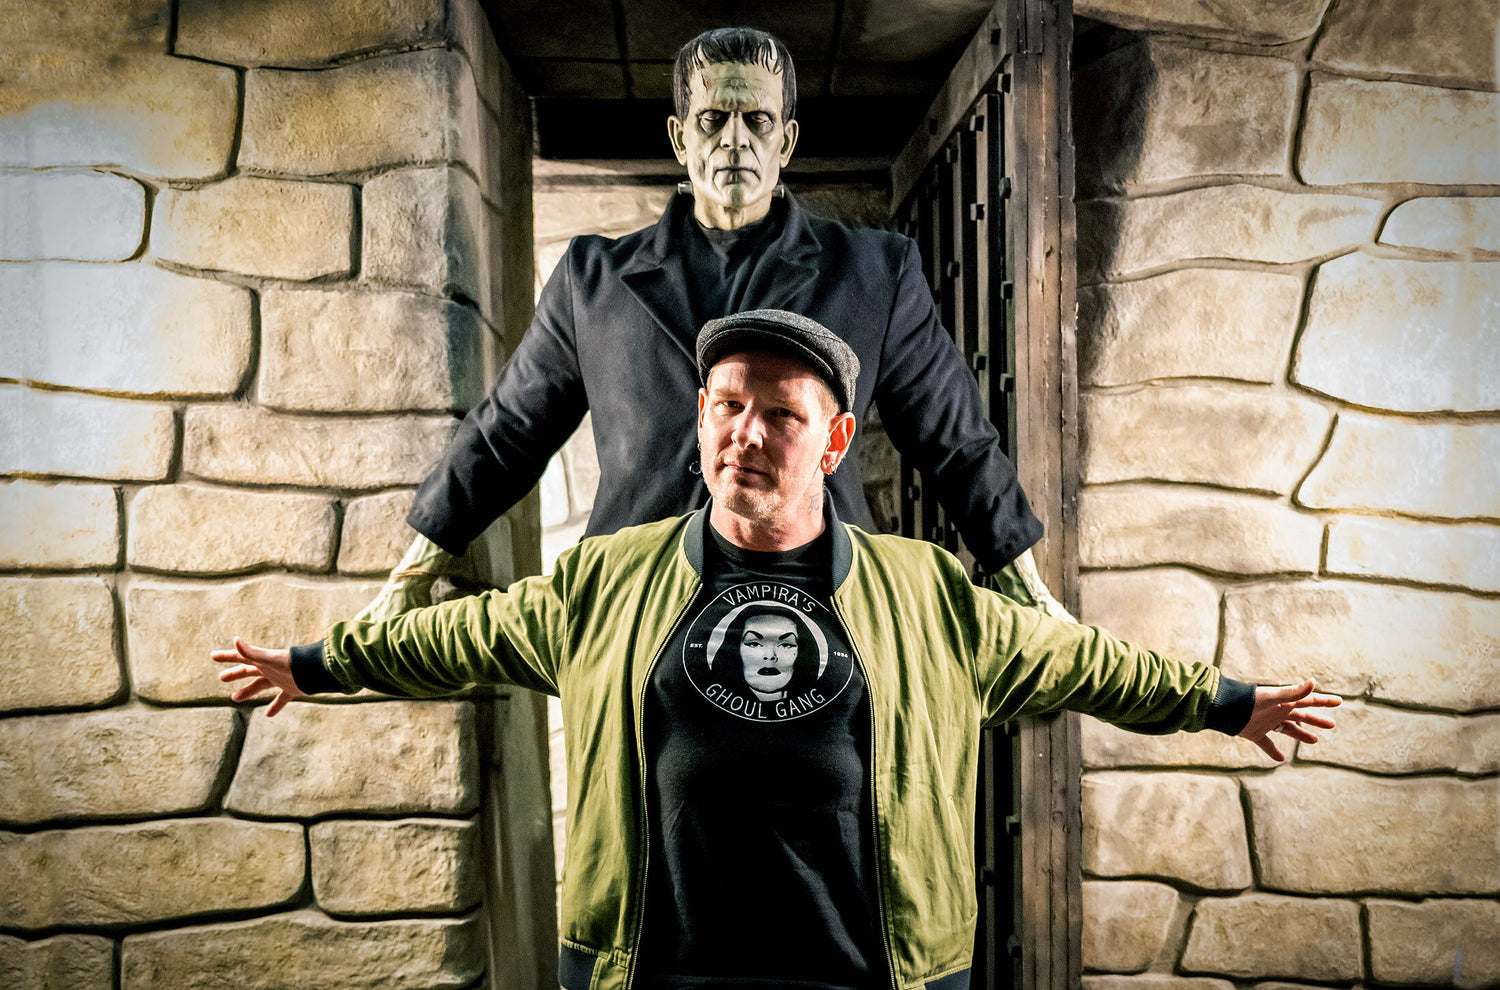 Famous Monsters FilmFest: Corey Taylor holds court in Hollywood for a celebration of classic horror